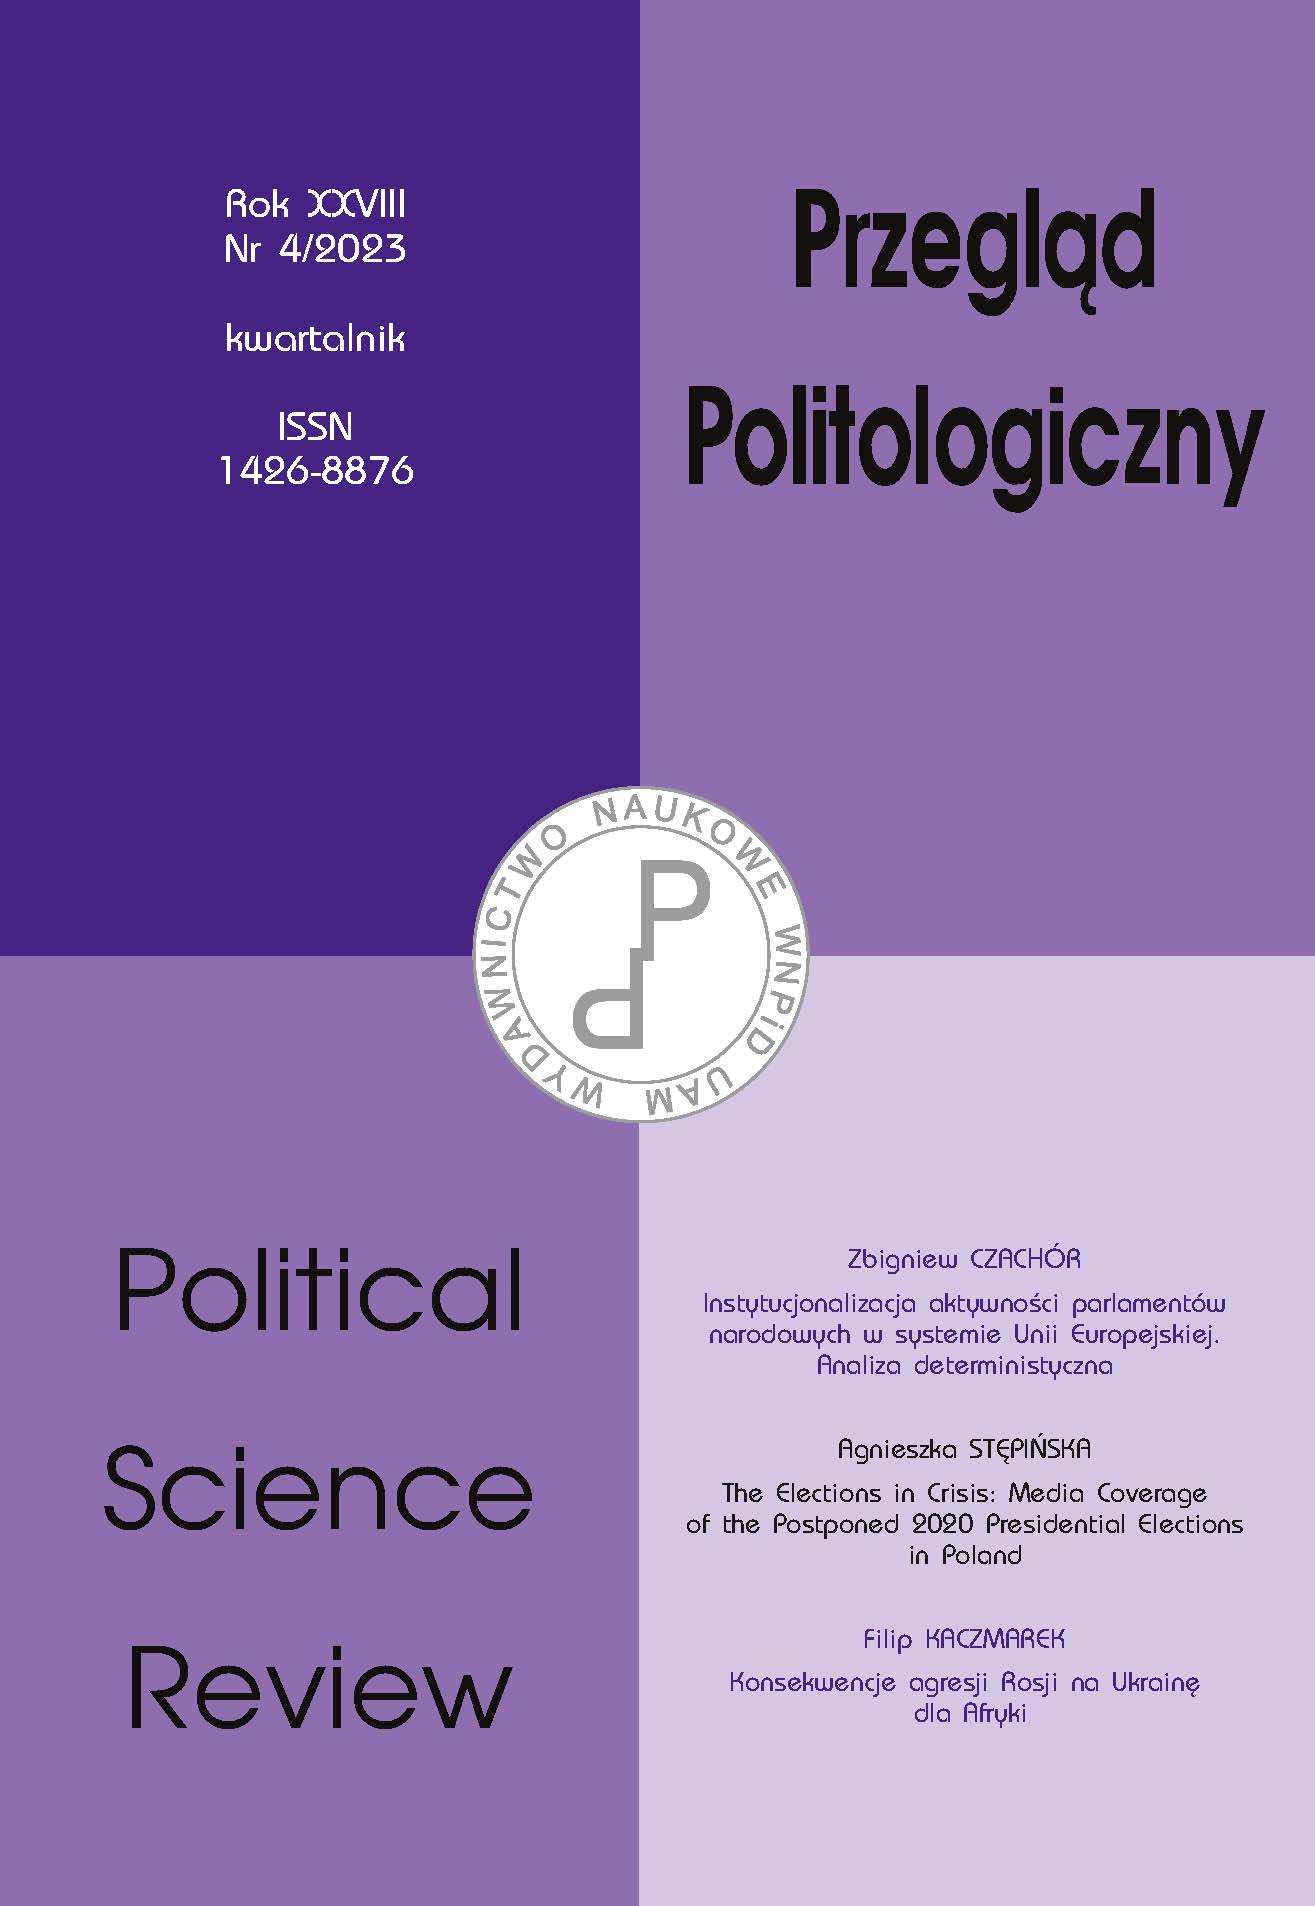 A Renaissance or a Breakup of Political Science? – A Postulative Article (An Introduction to Programmatic Debate) Cover Image